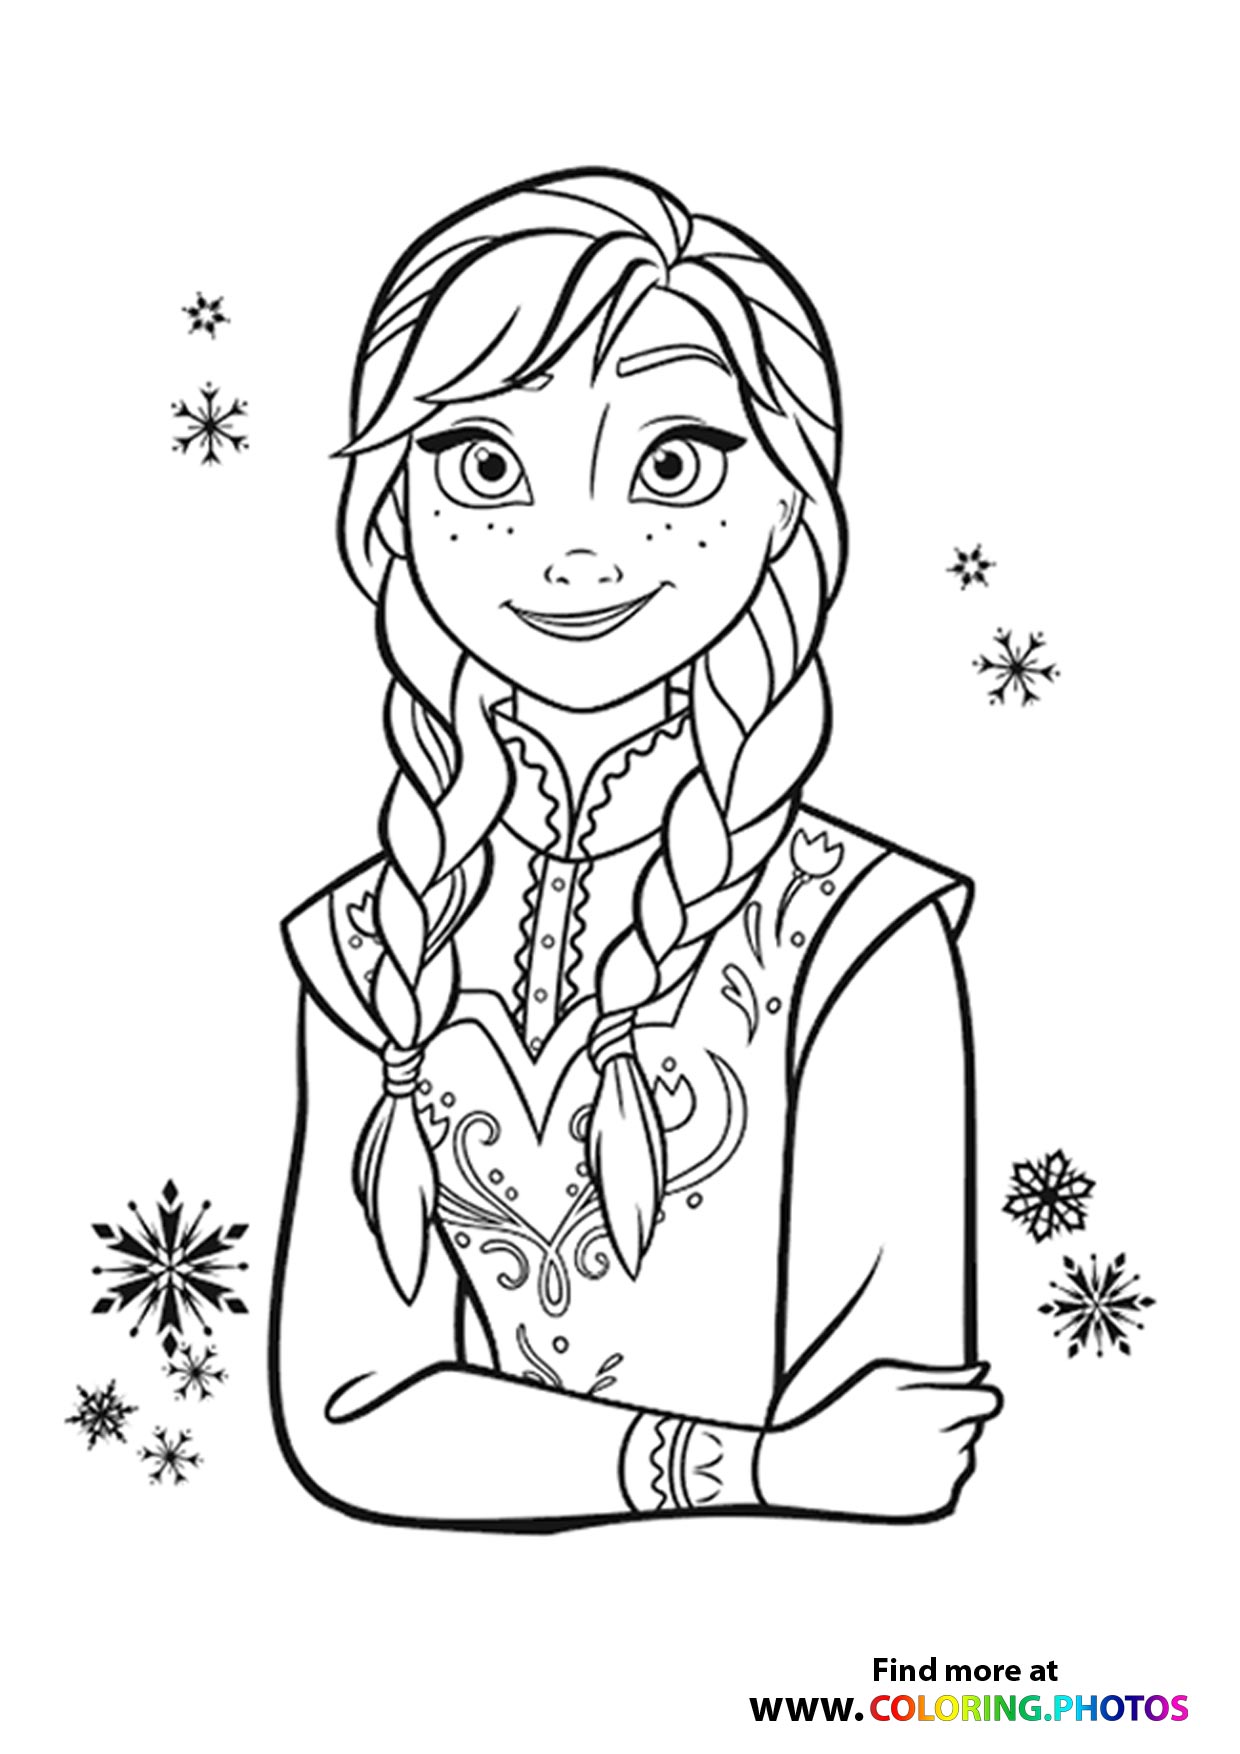 Mirabel's sister - Encanto - Coloring Pages for kids